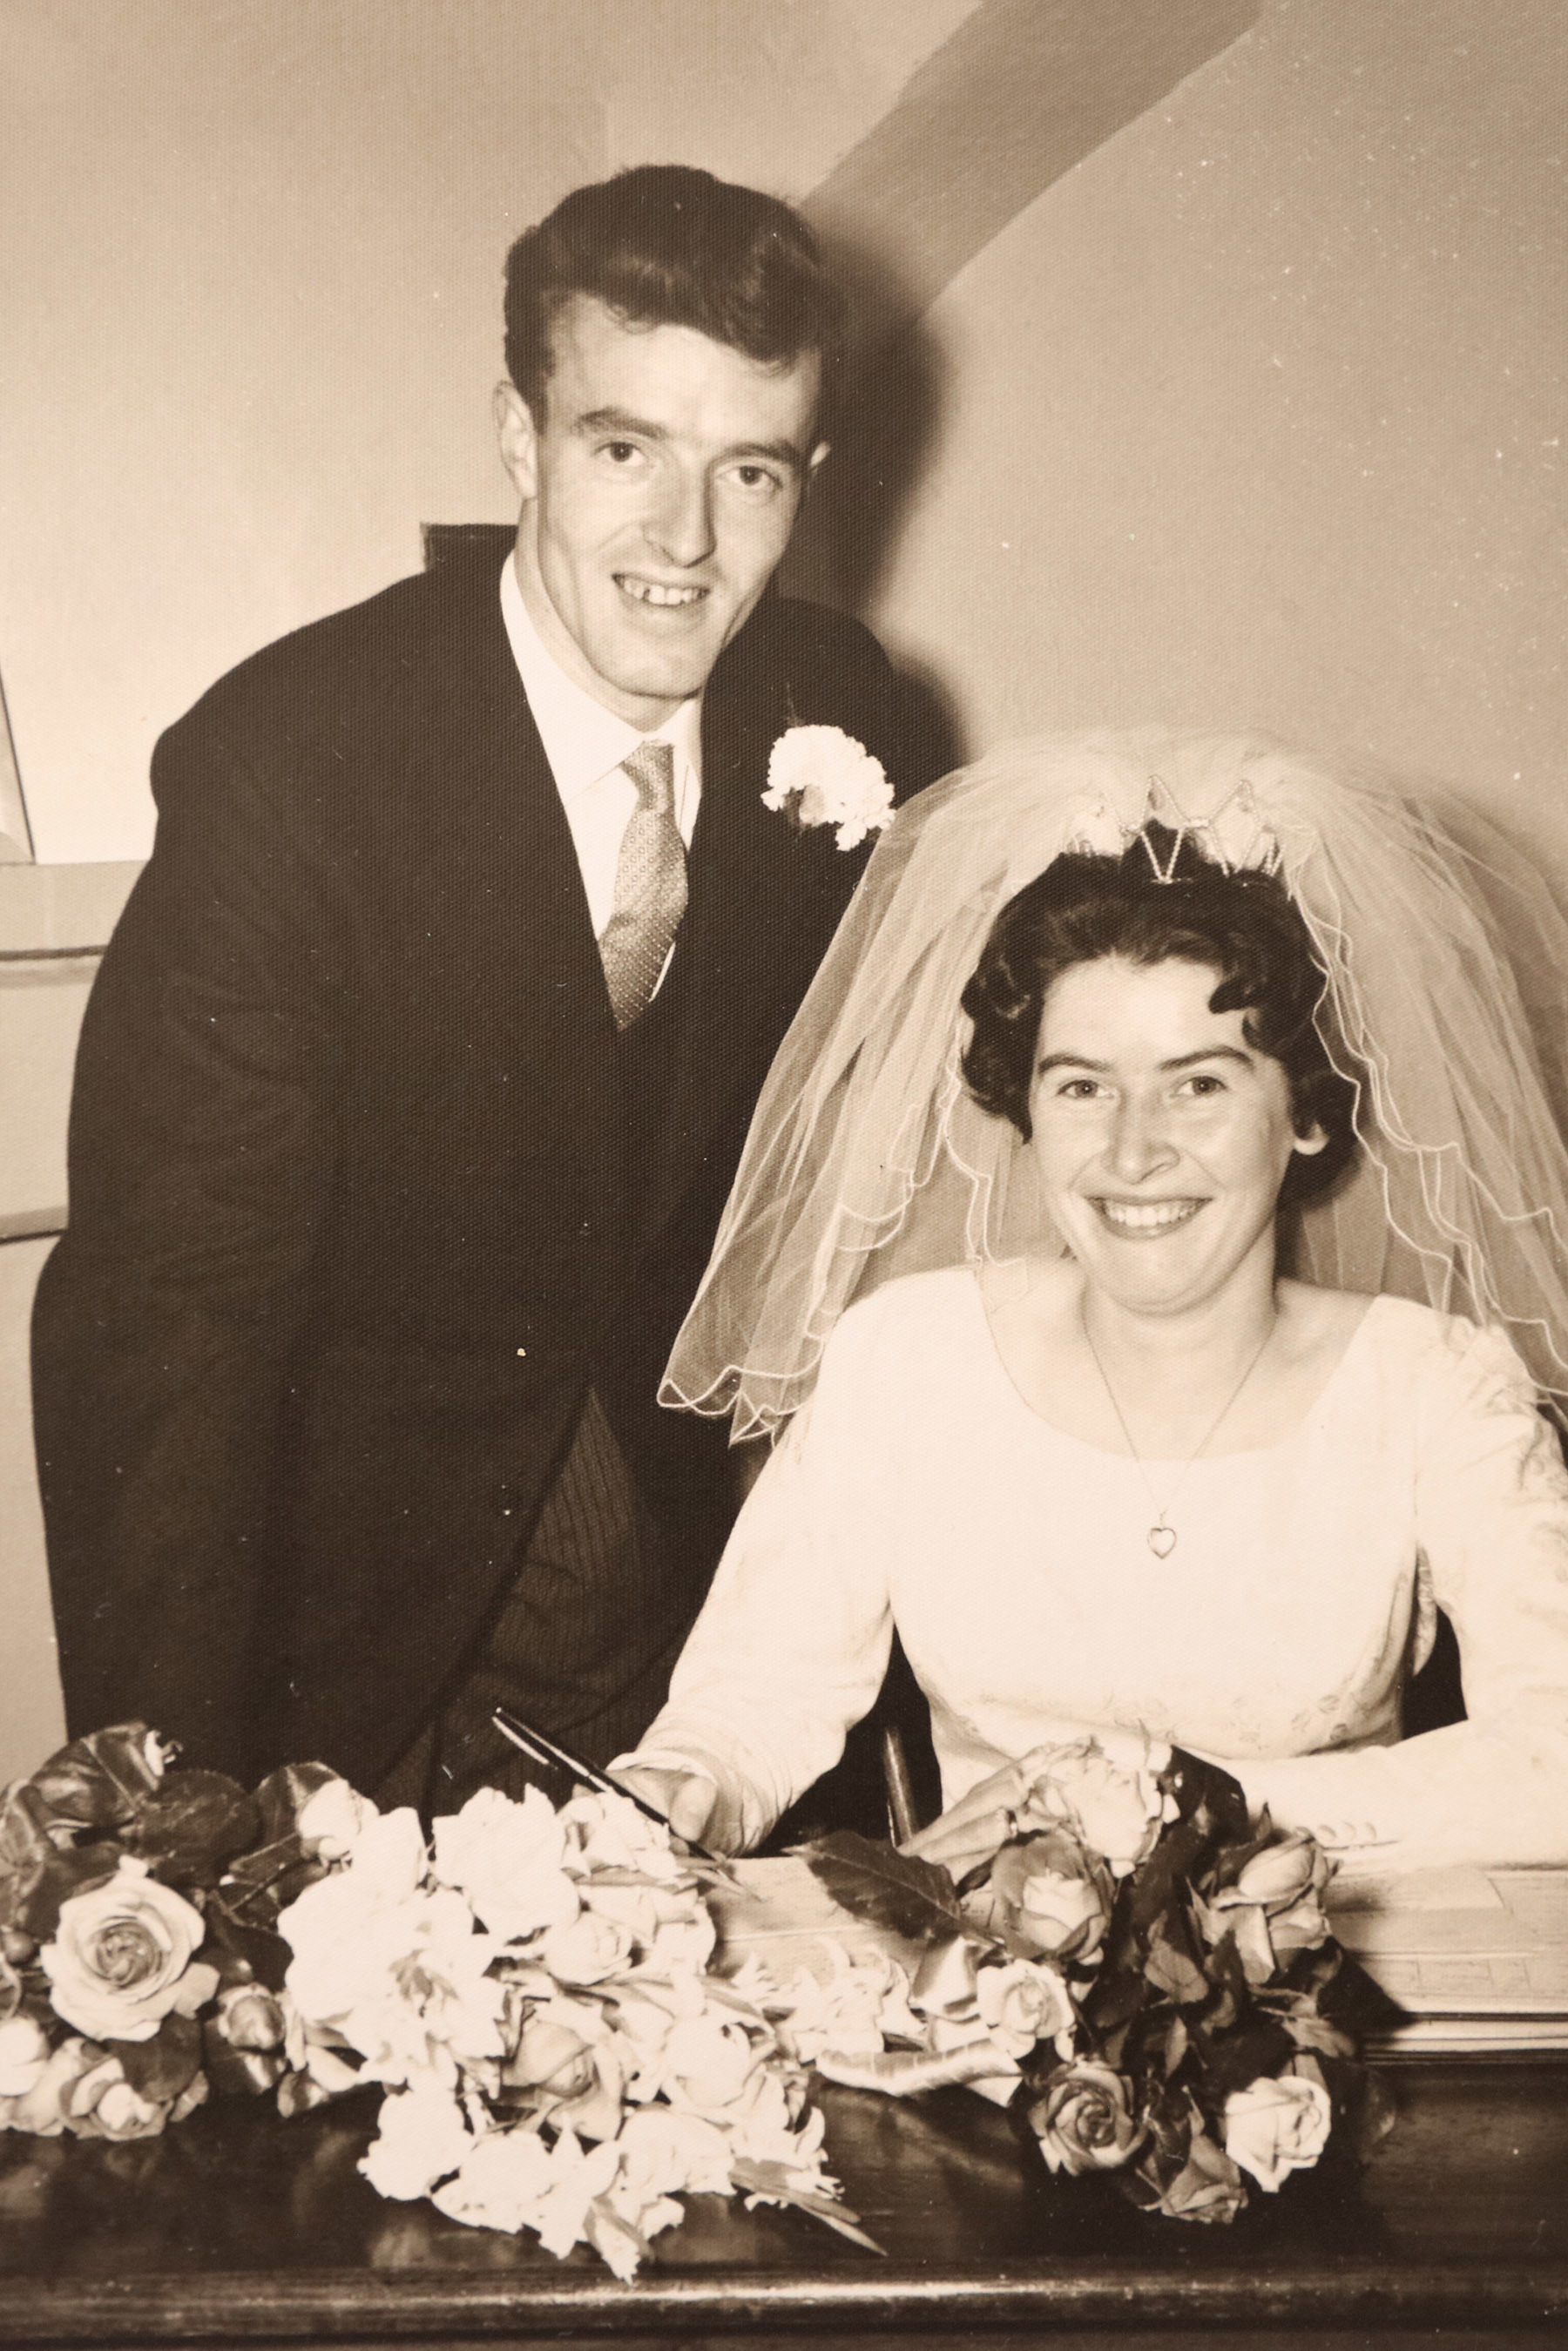 Doris and Ernie Campbell pictured on their wedding day on July, 24, 1962.